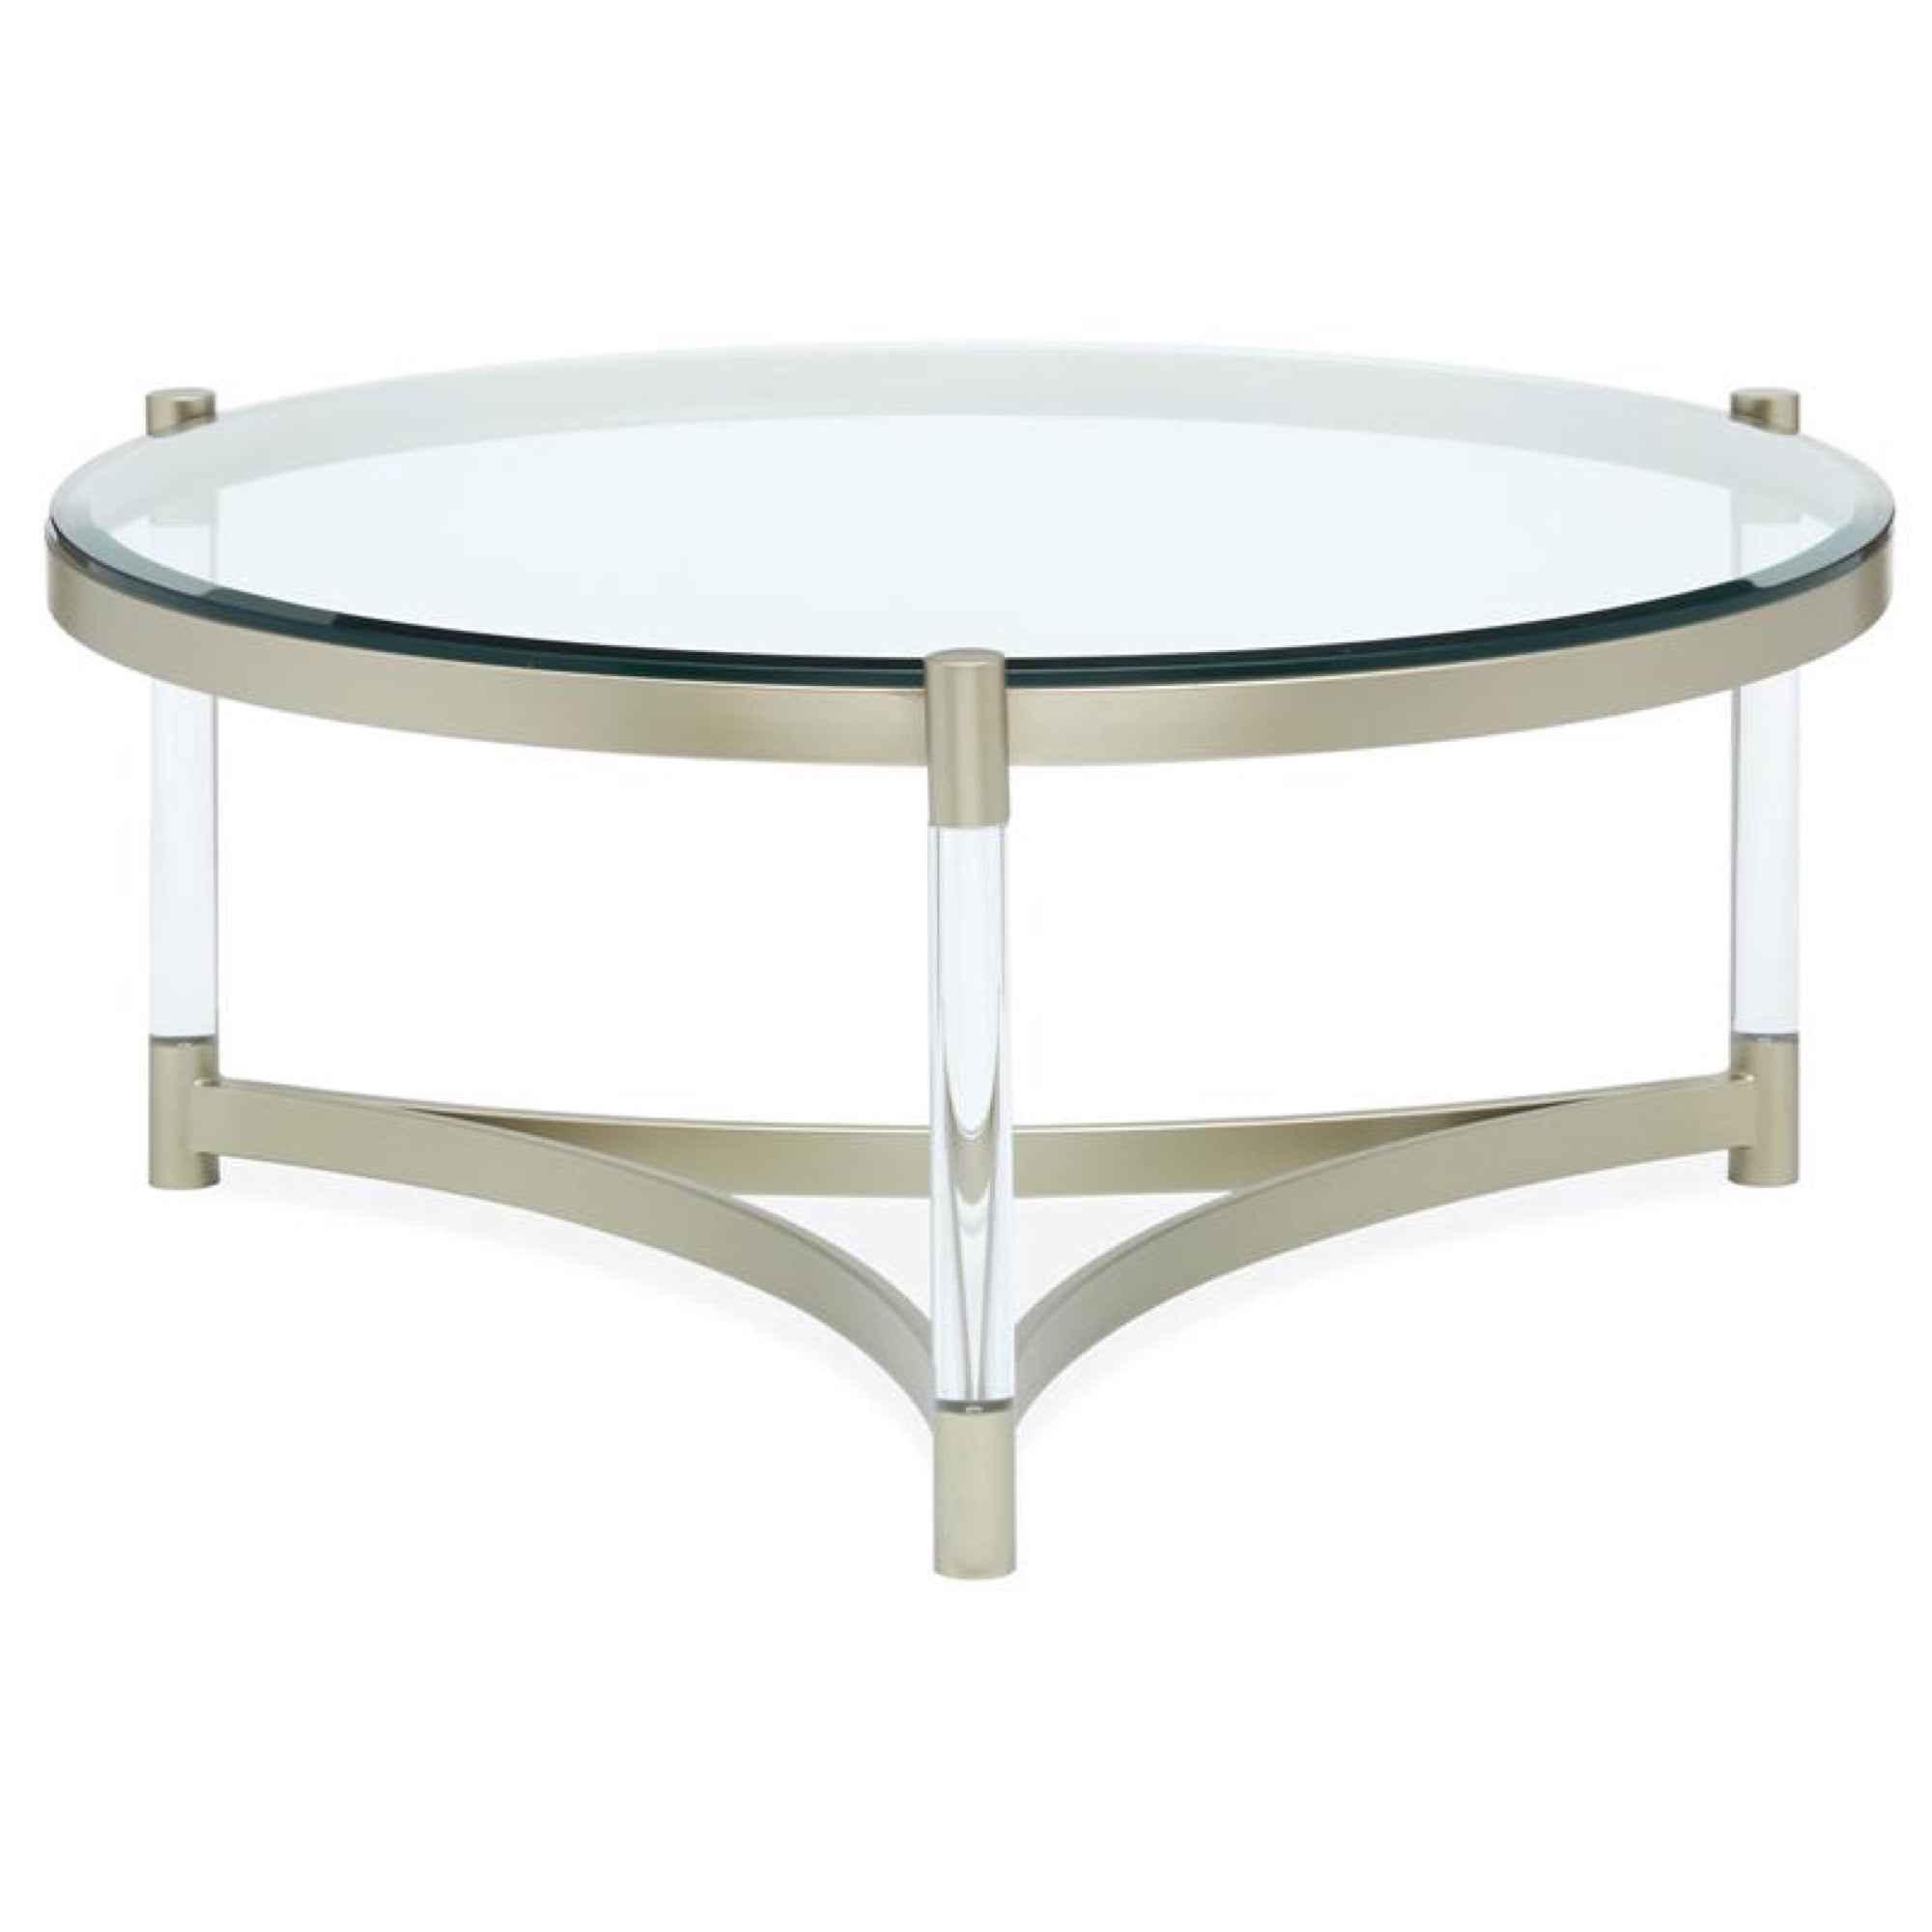 Silas Round Coffee Table